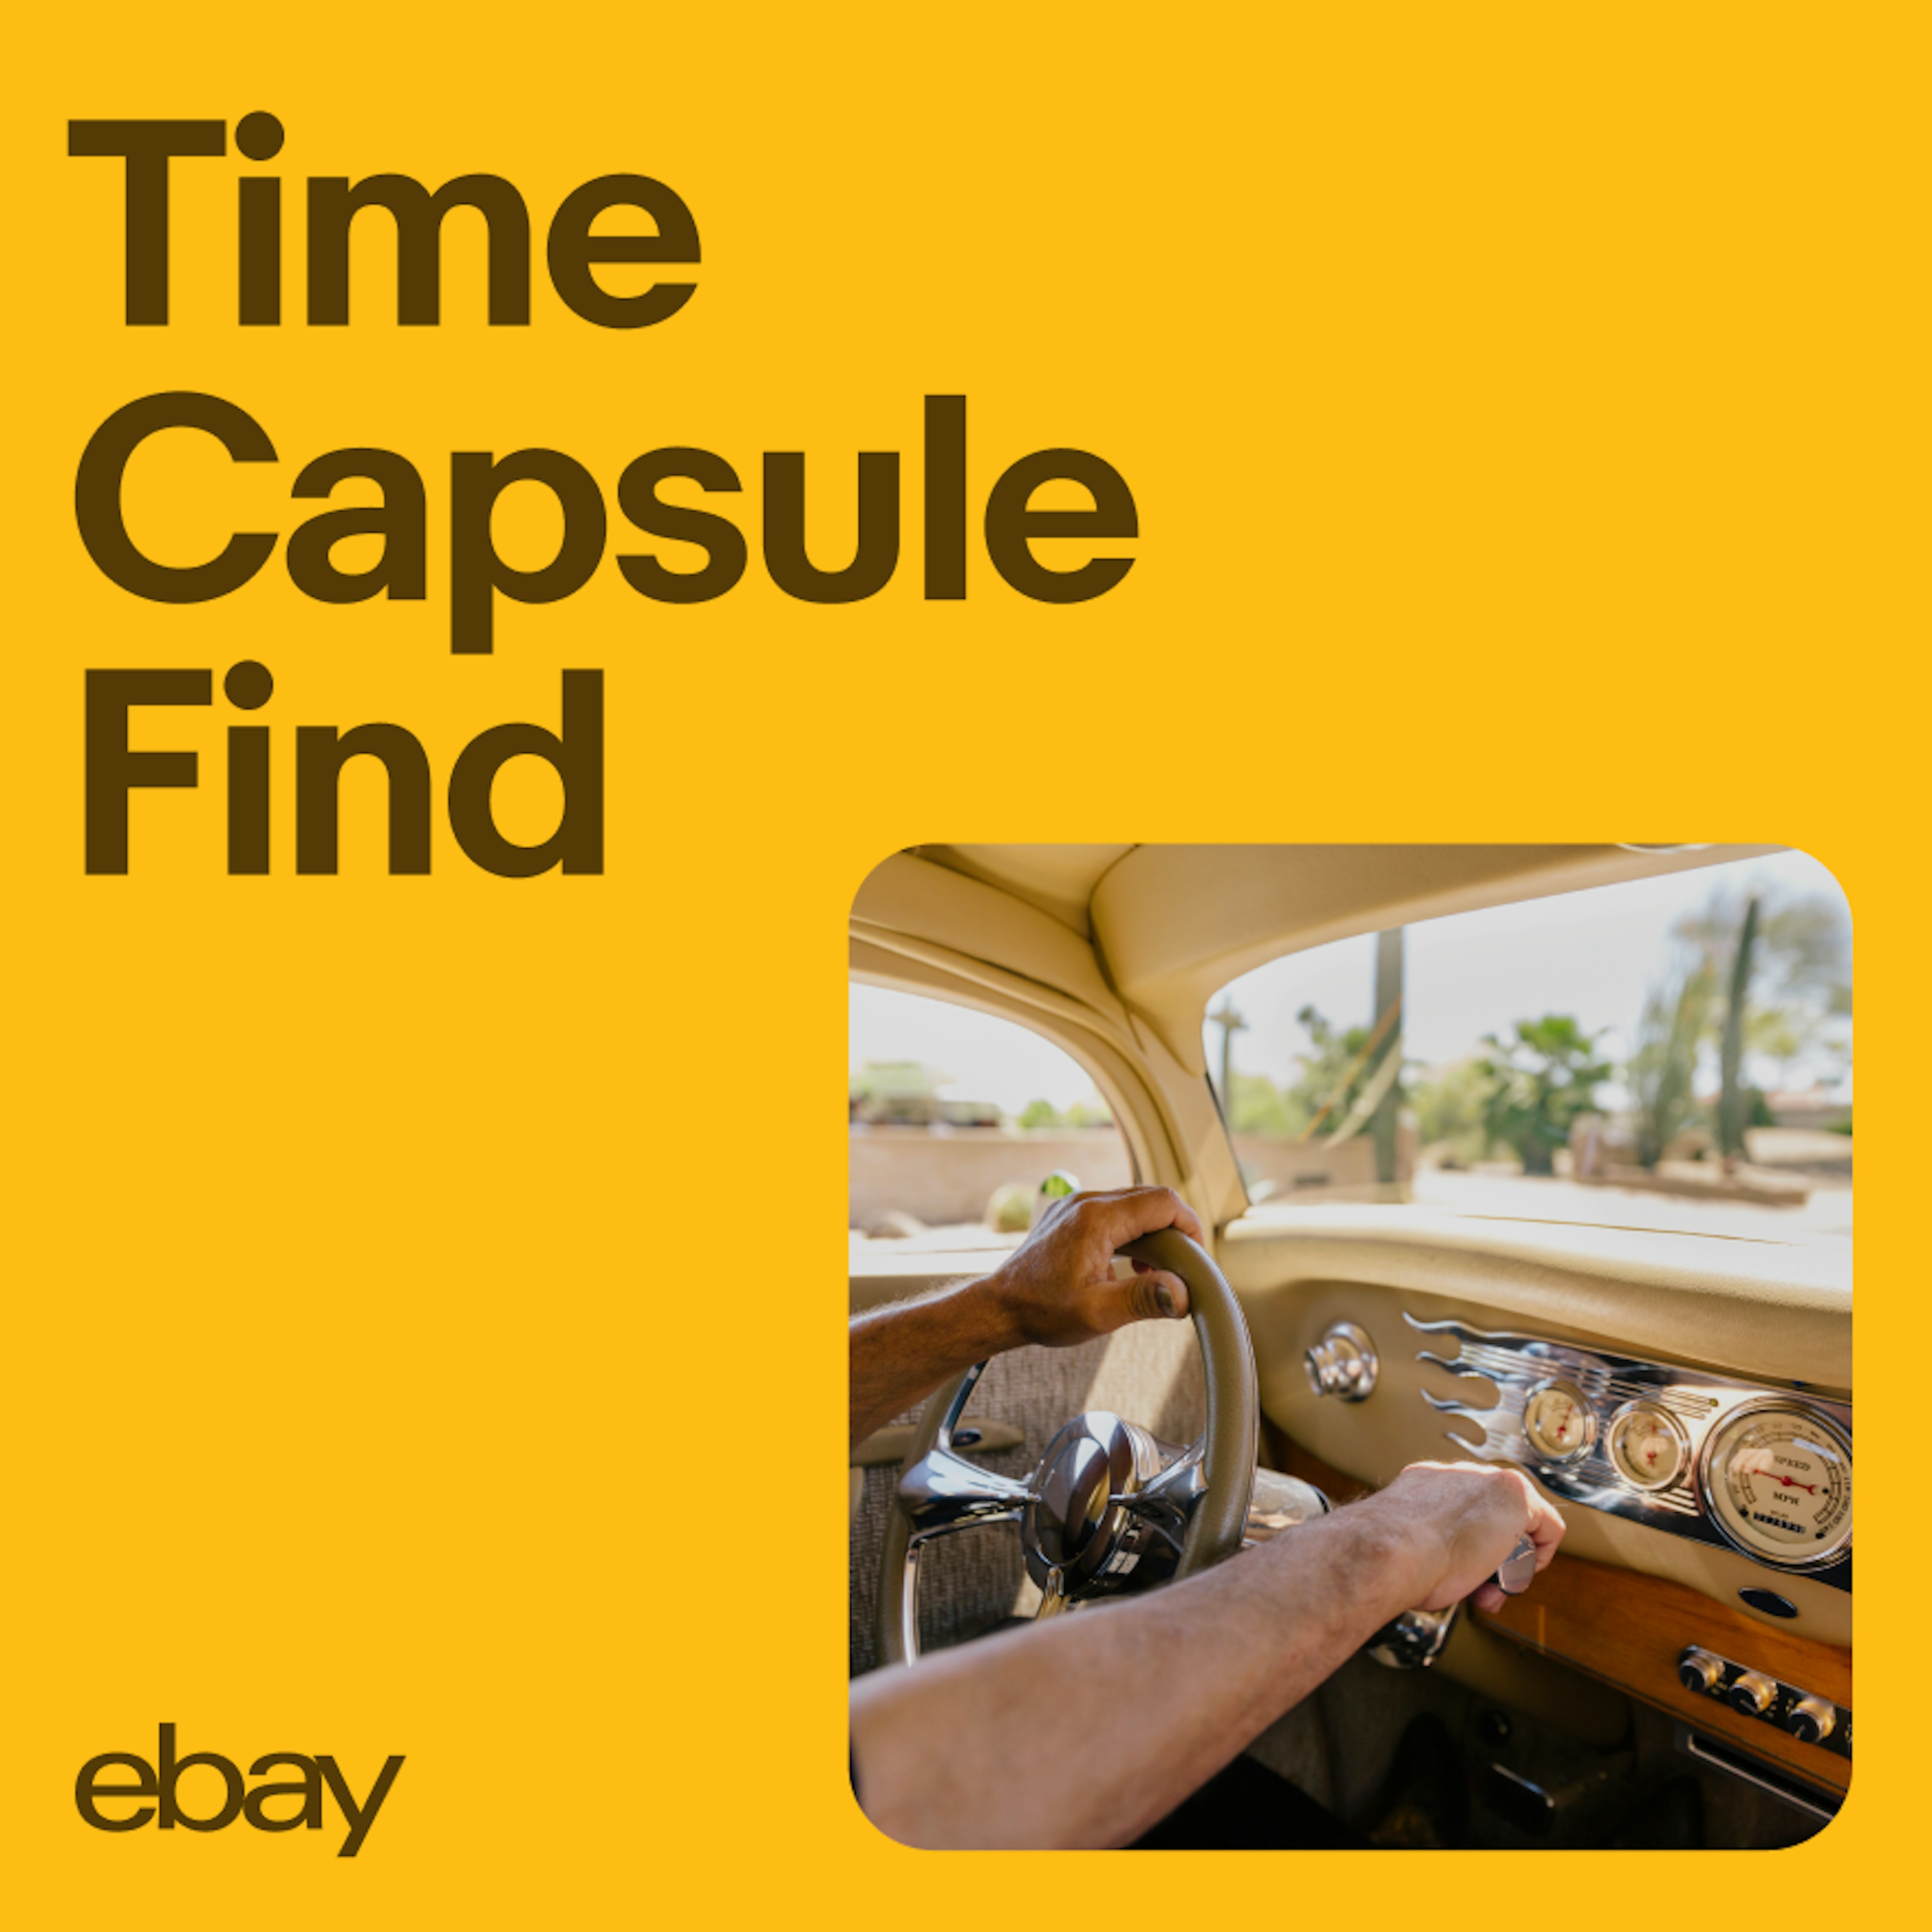 A vibrant yellow ad for motors. The official campaign name used in the headline is “Time Capsule Find”.